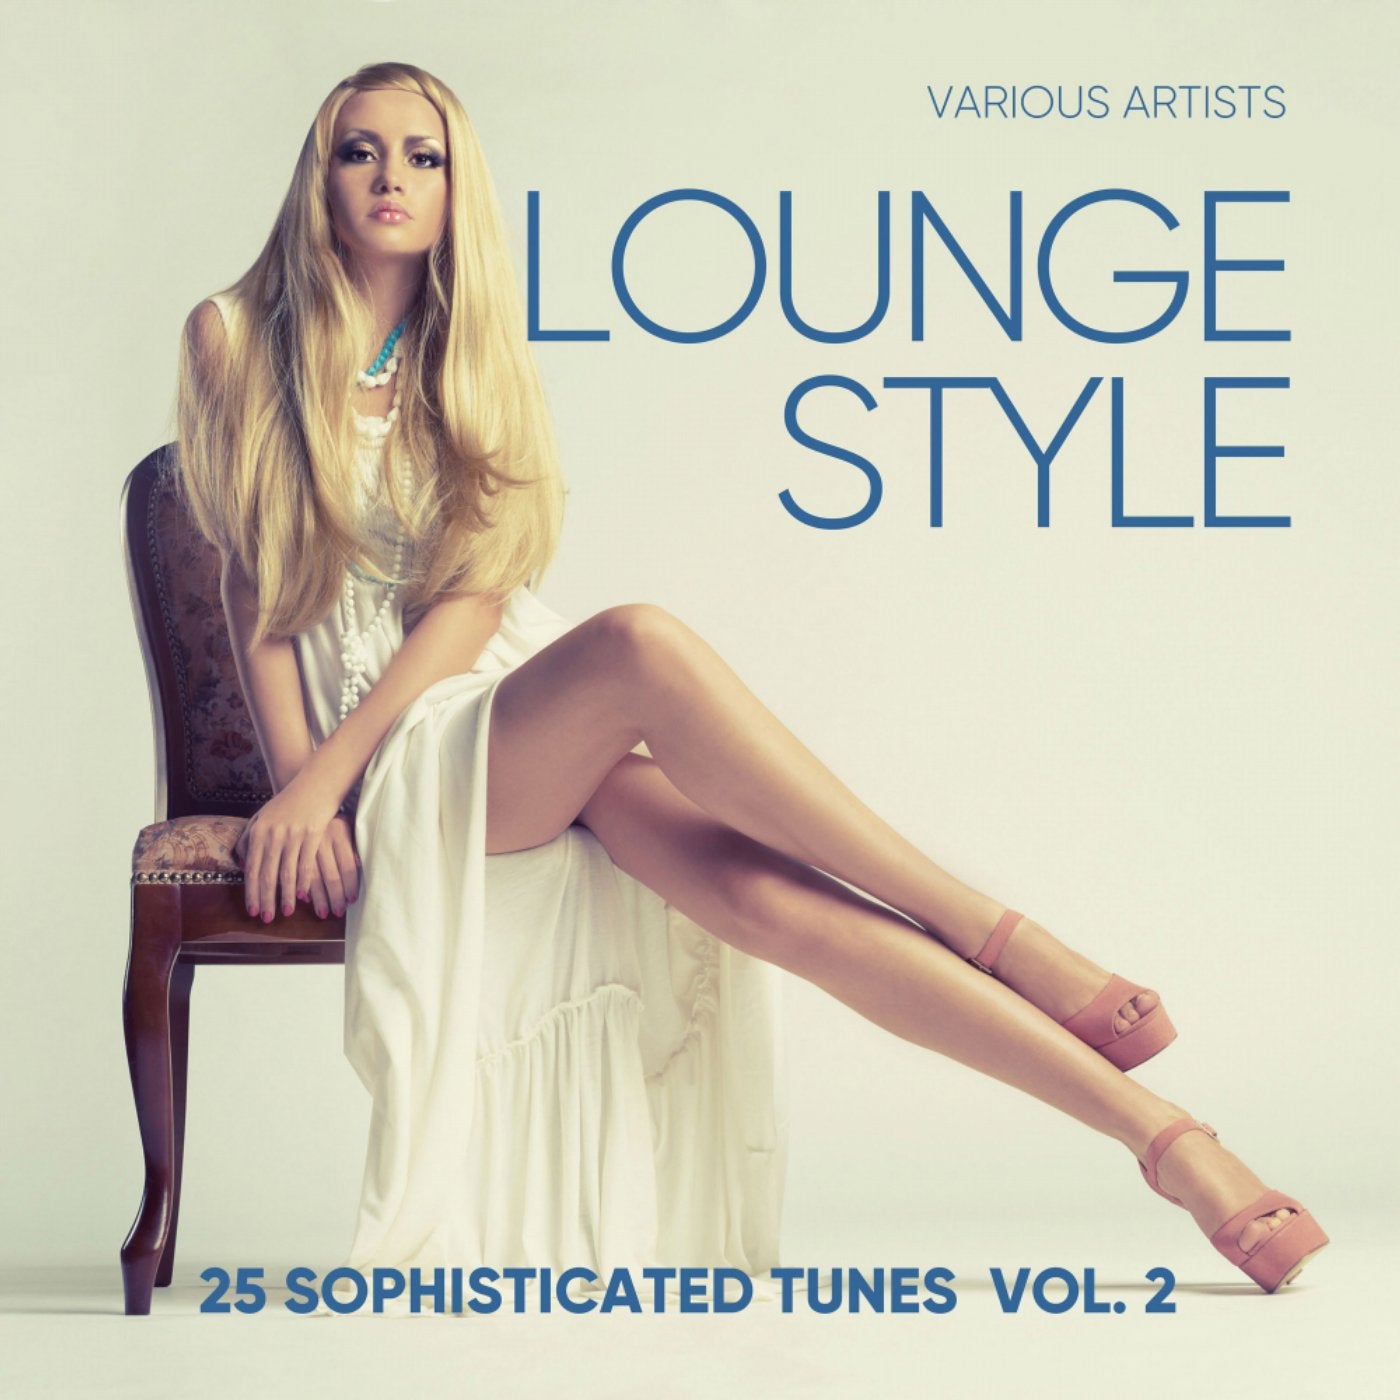 Lounge Style (25 Sophisticated Tunes), Vol. 2